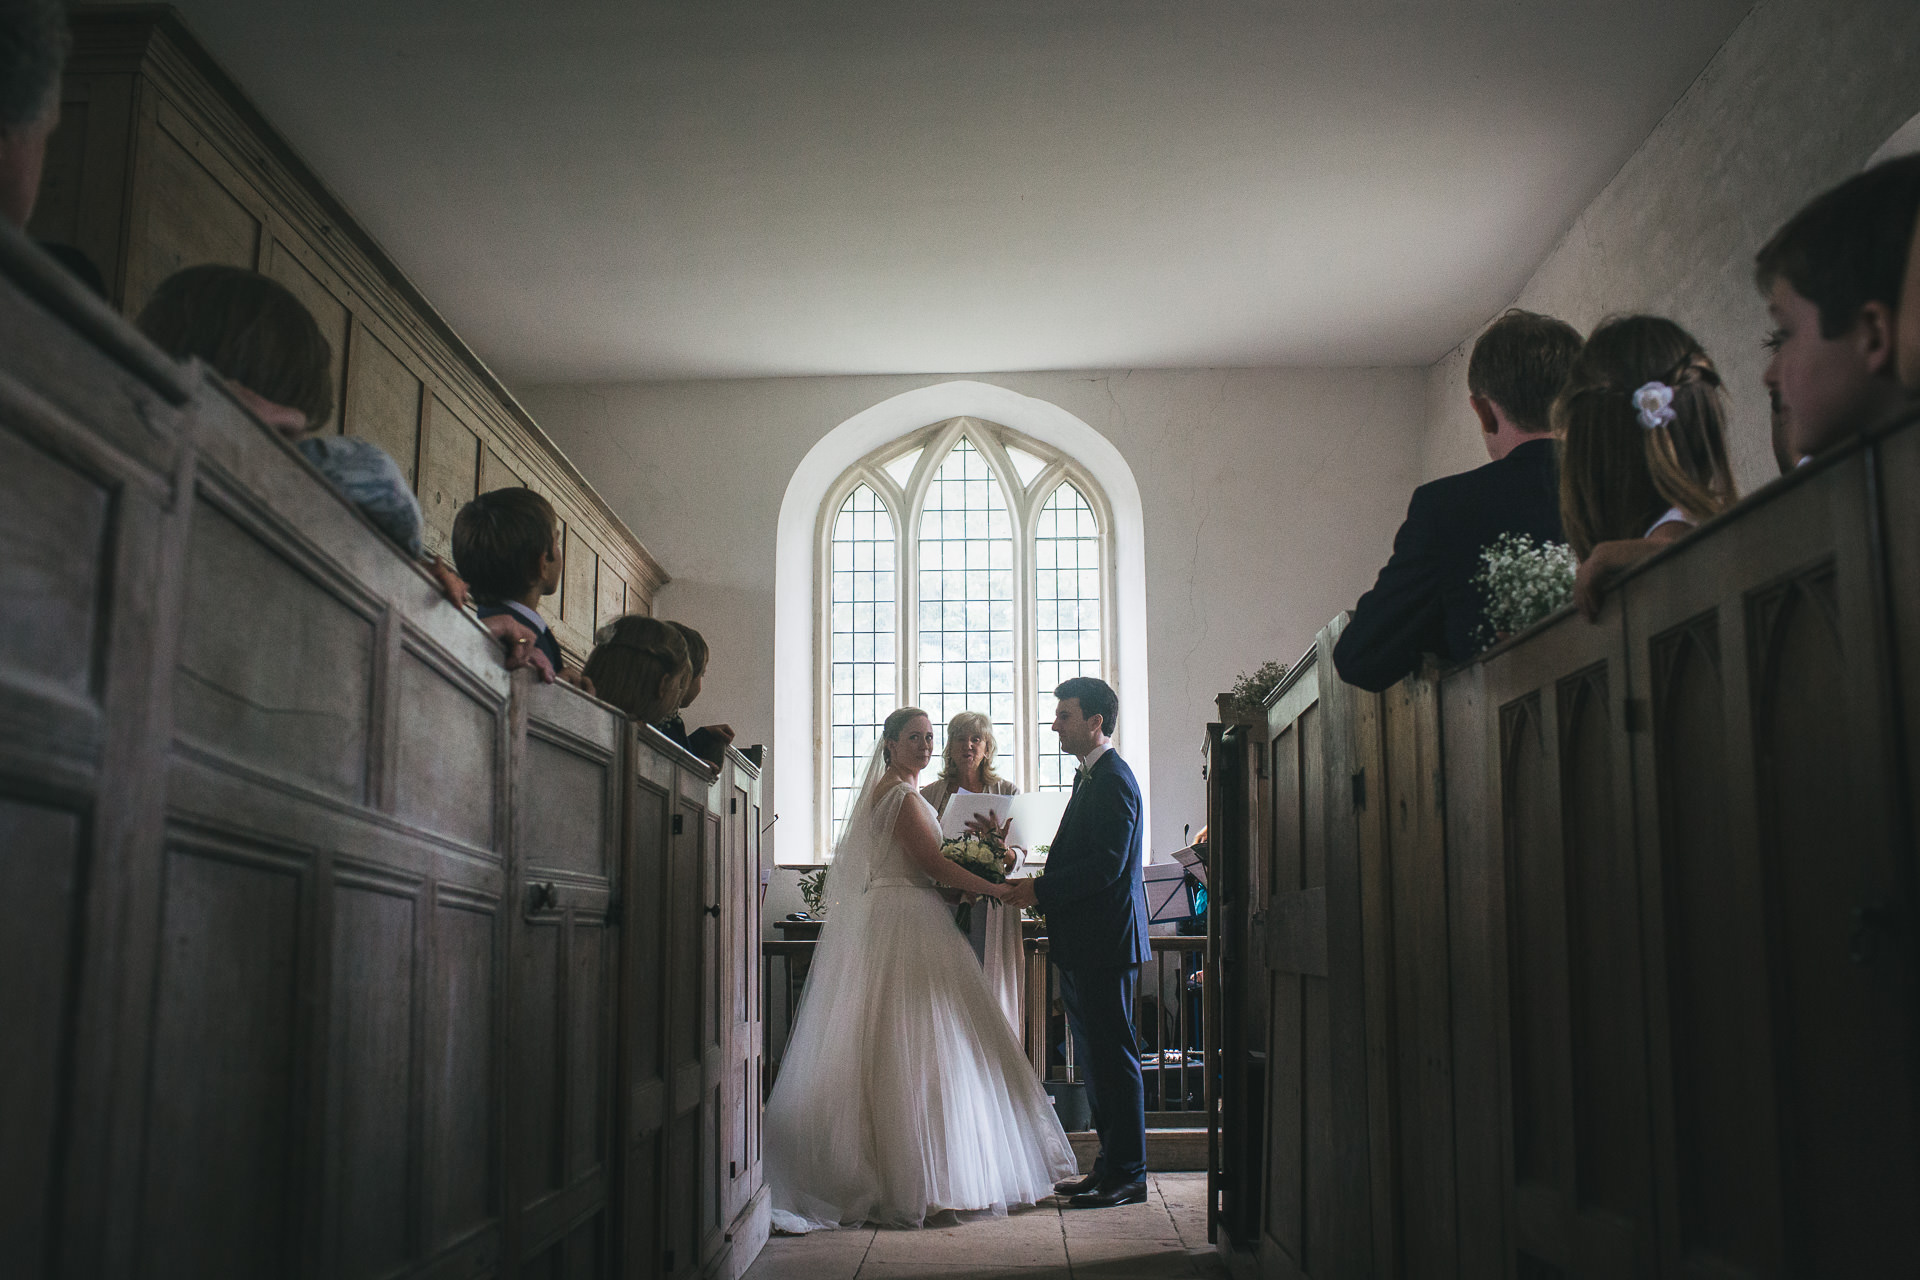 Bride and groom in front of large arched window during humanist wedding ceremony